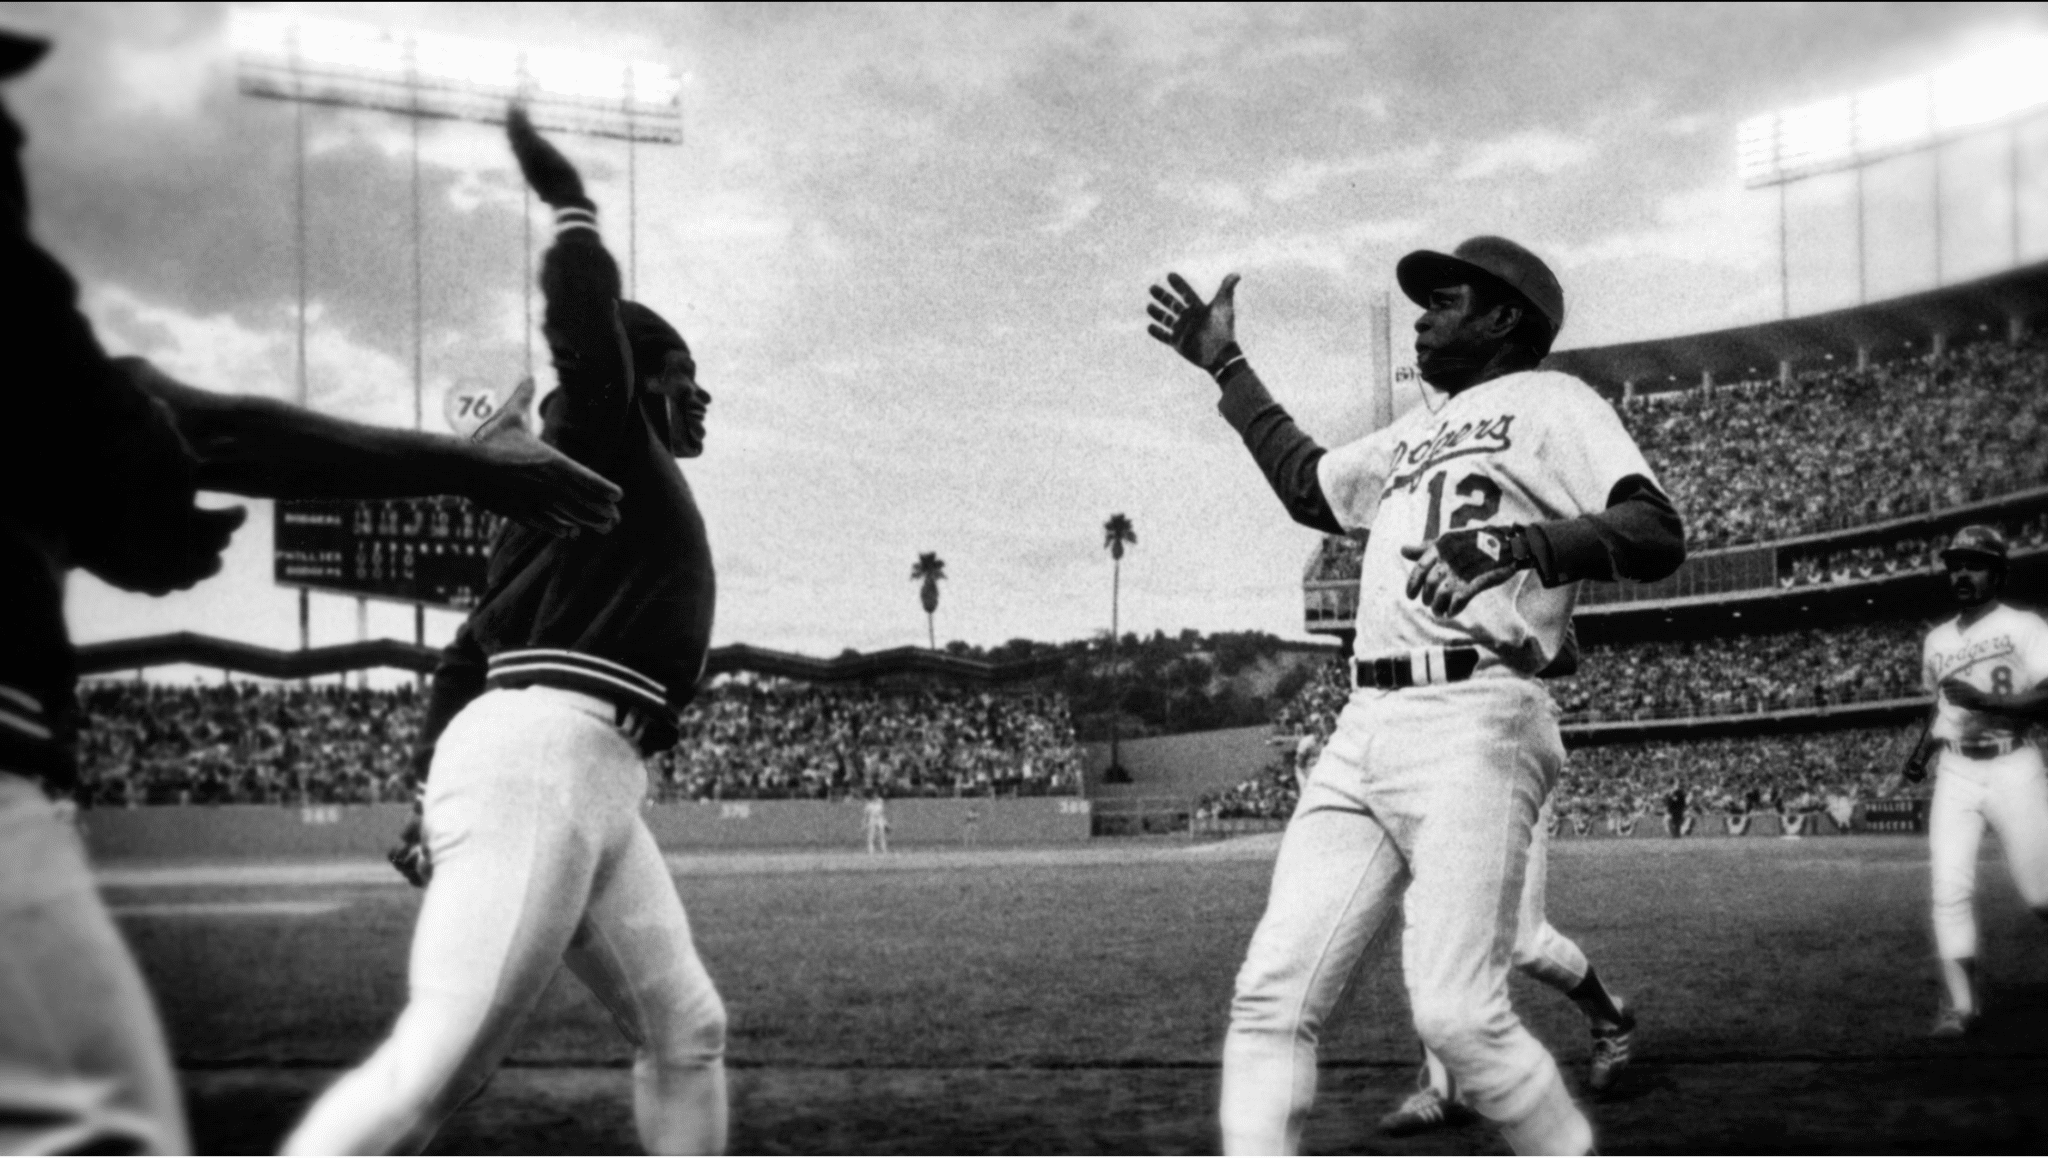 The first high five by Dusty Baker and Glenn Burke of the Los Angeles
Dodgers baseball team on 2 October 1977